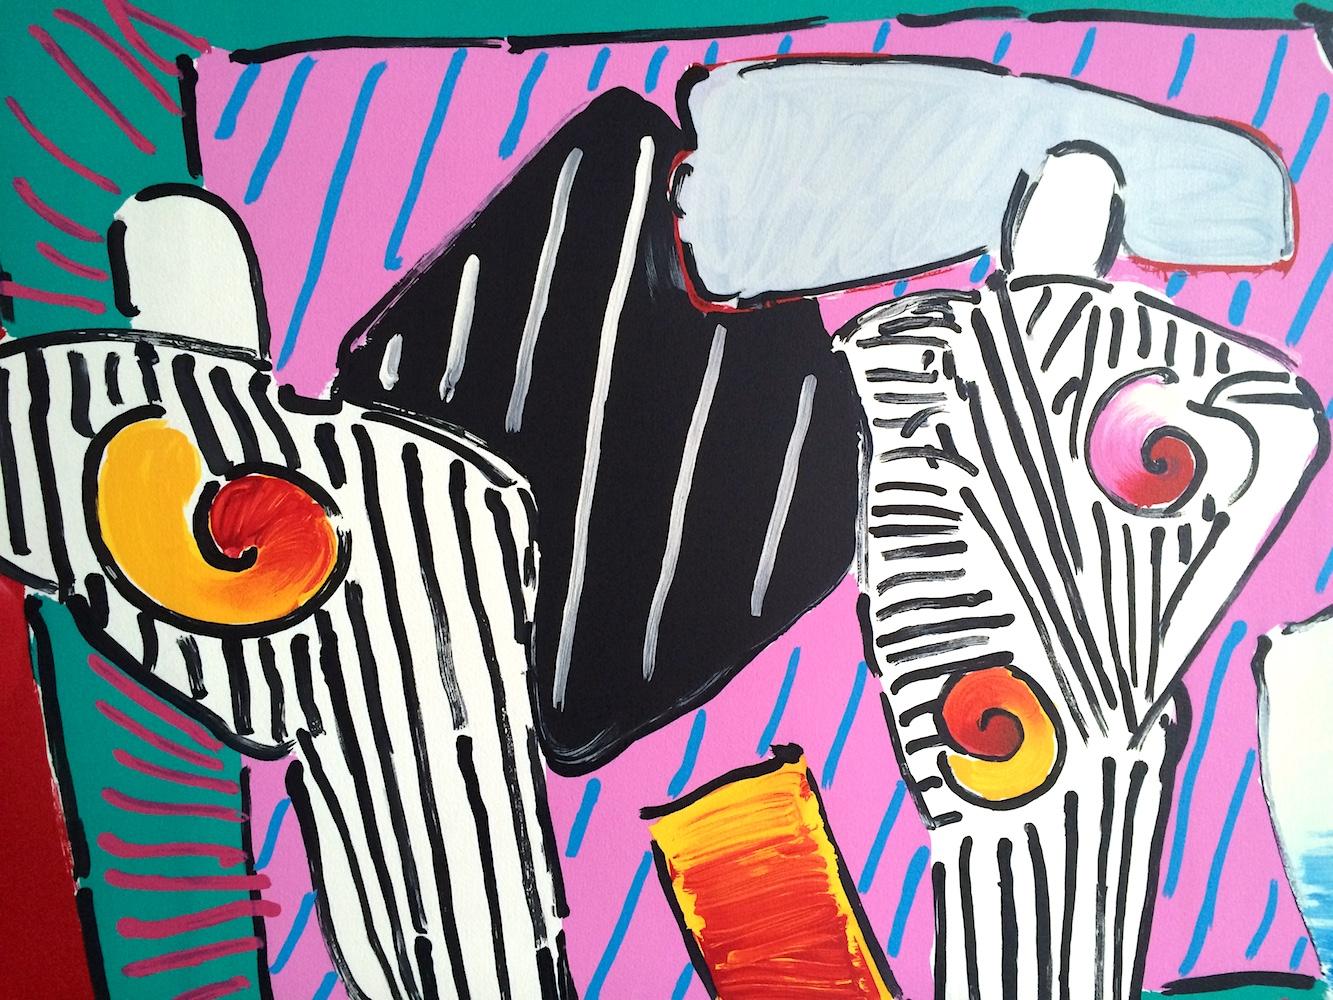 TIMELINE DEGA MAN Signed Lithograph, Abstract Portrait Black White Stripe Robes - Print by Peter Max